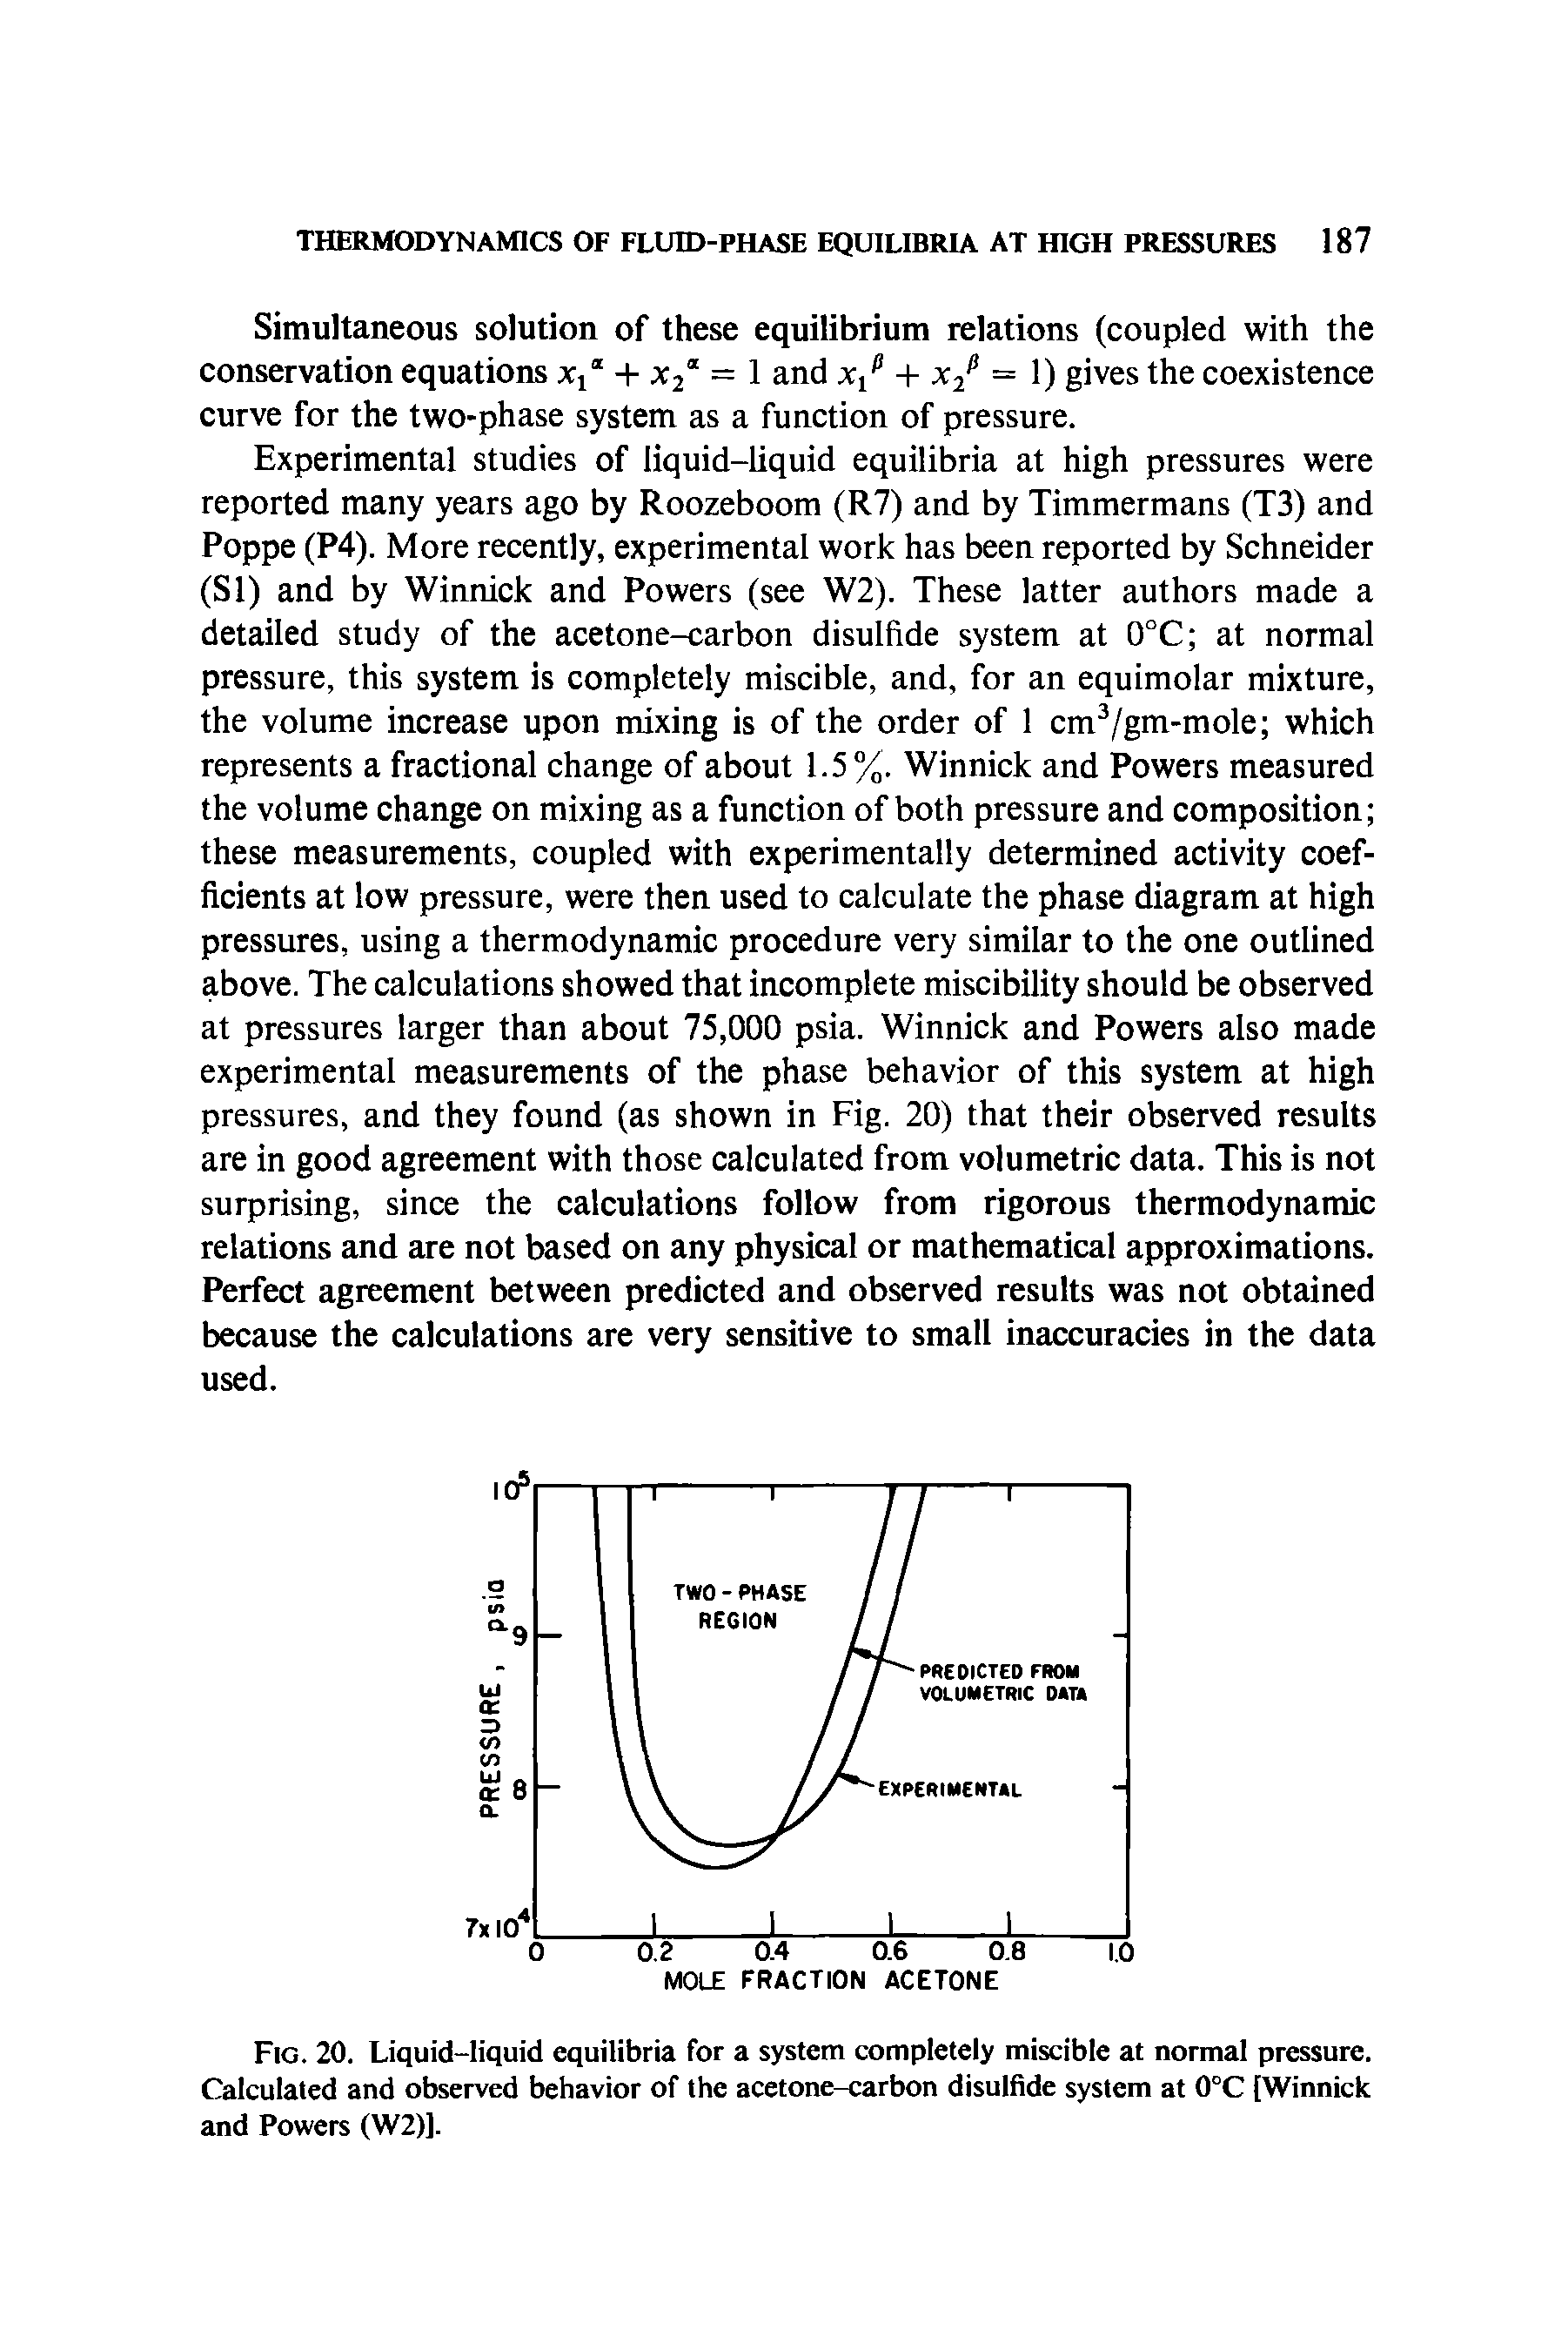 Fig. 20. Liquid-liquid equilibria for a system completely miscible at normal pressure. Calculated and observed behavior of the acetone-carbon disulfide system at 0°C [Winnick and Powers (W2)].